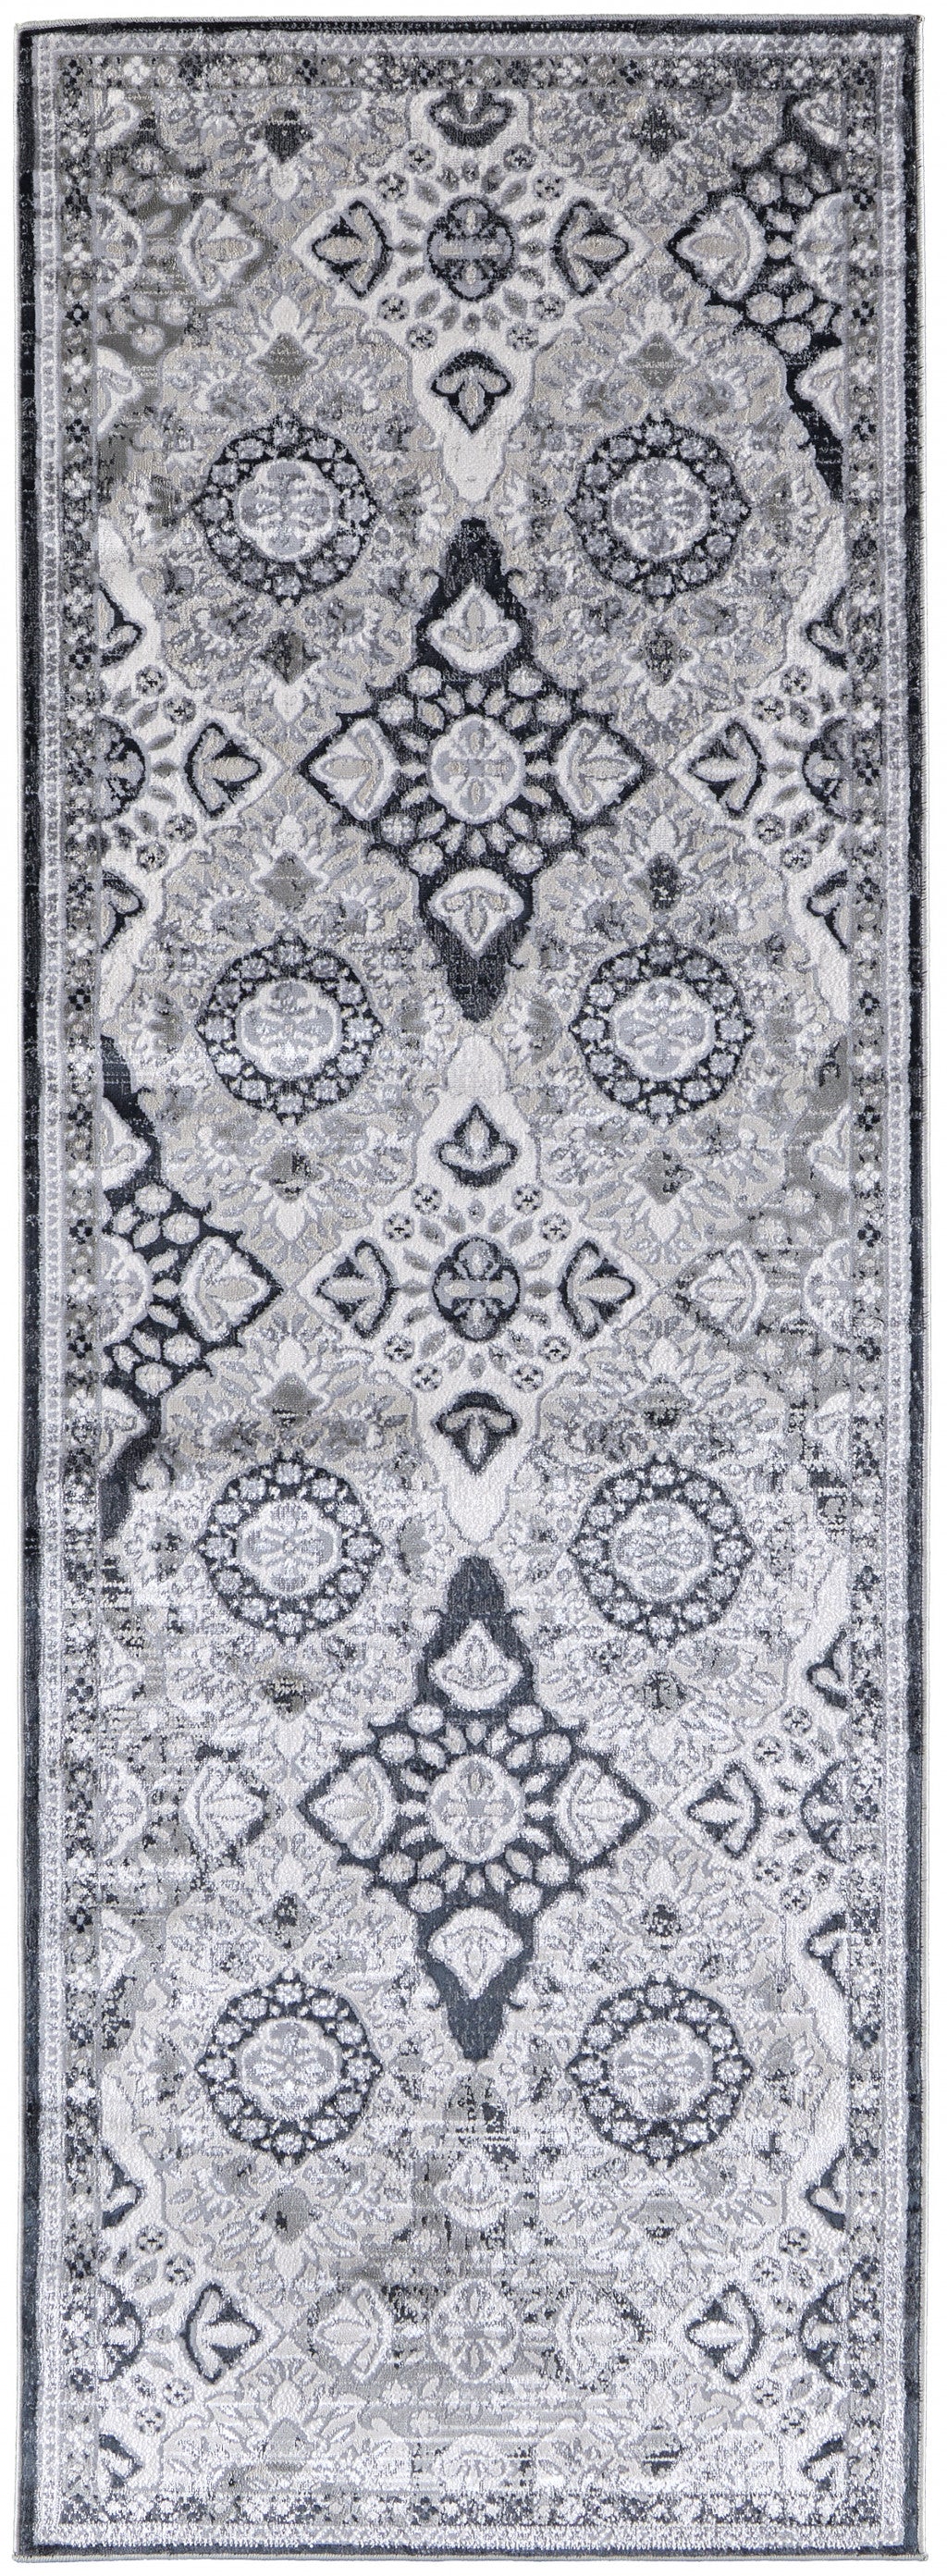 4' X 6' Gray And Black Abstract Power Loom Area Rug